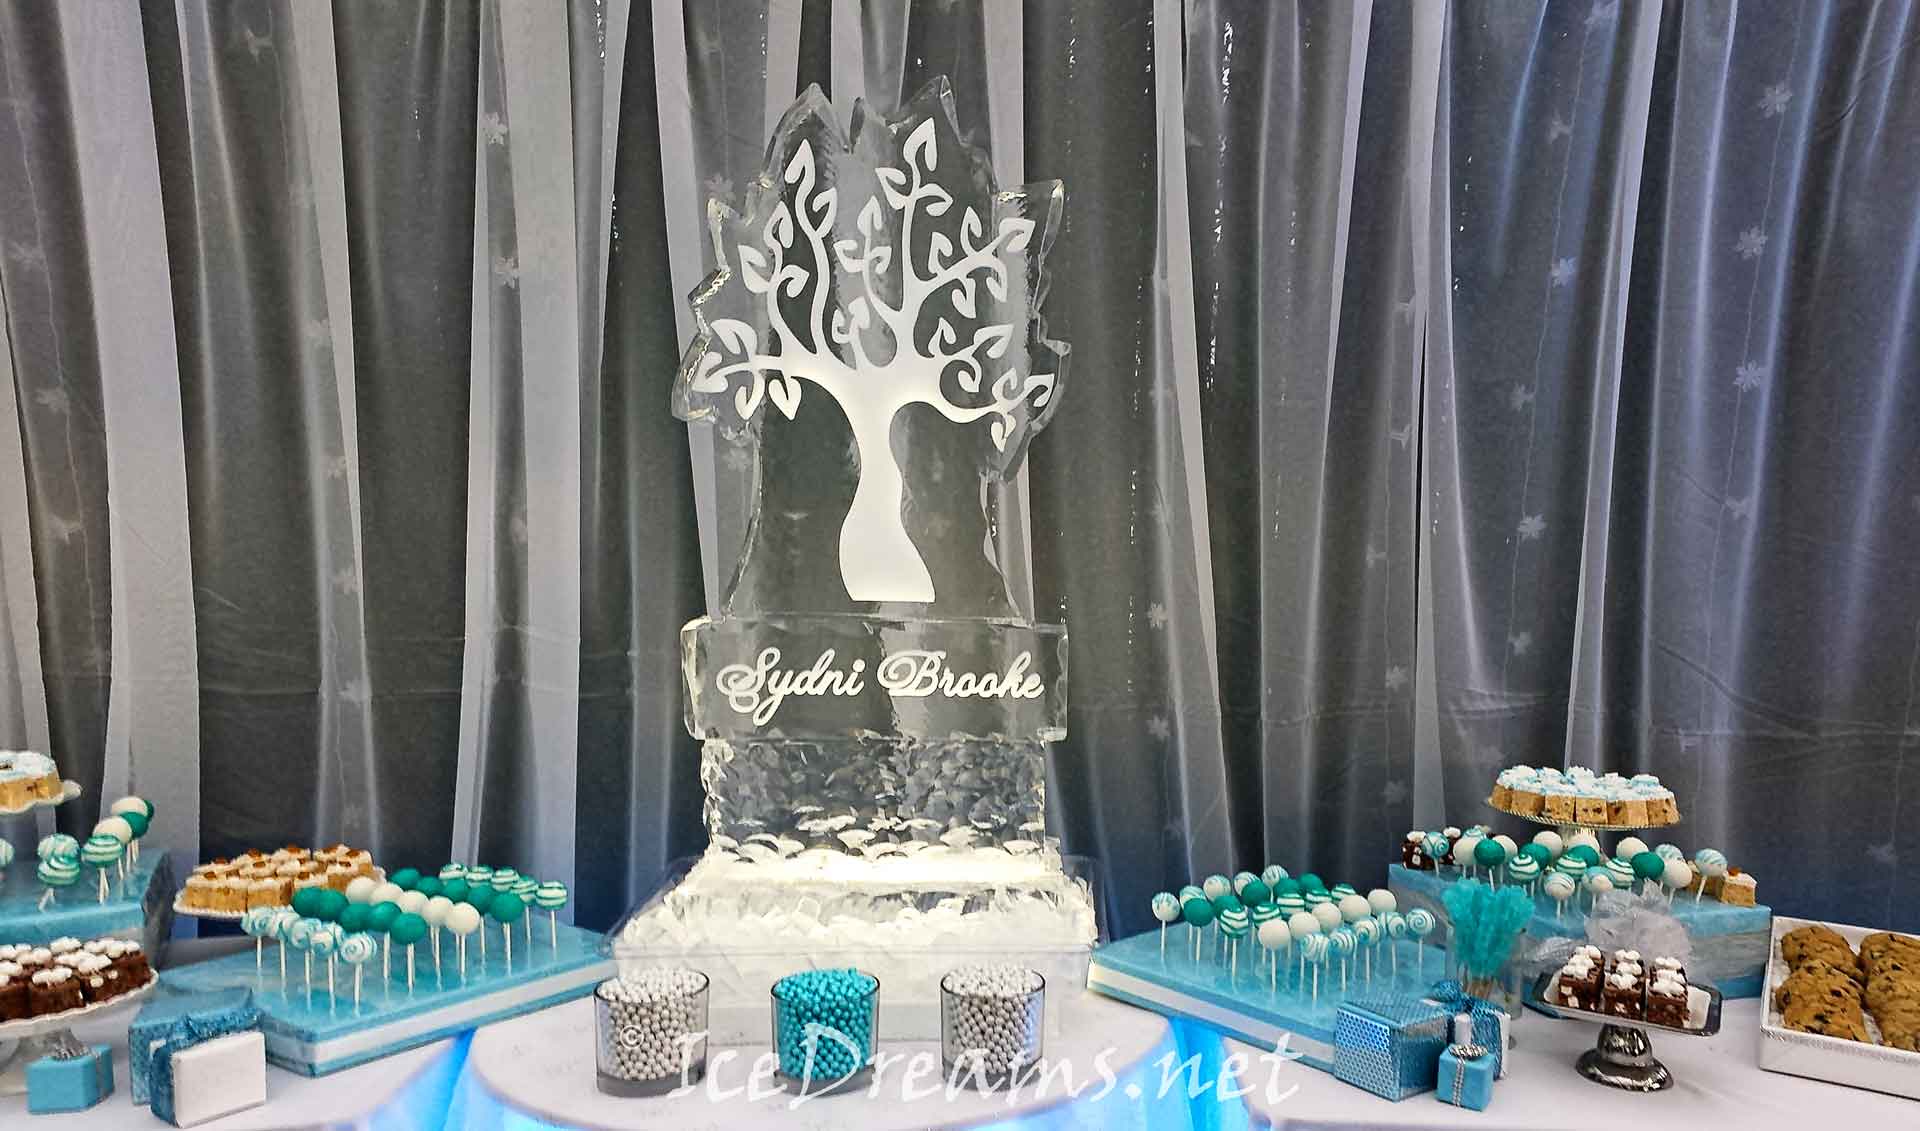 Small and simple wedding ice sculpture